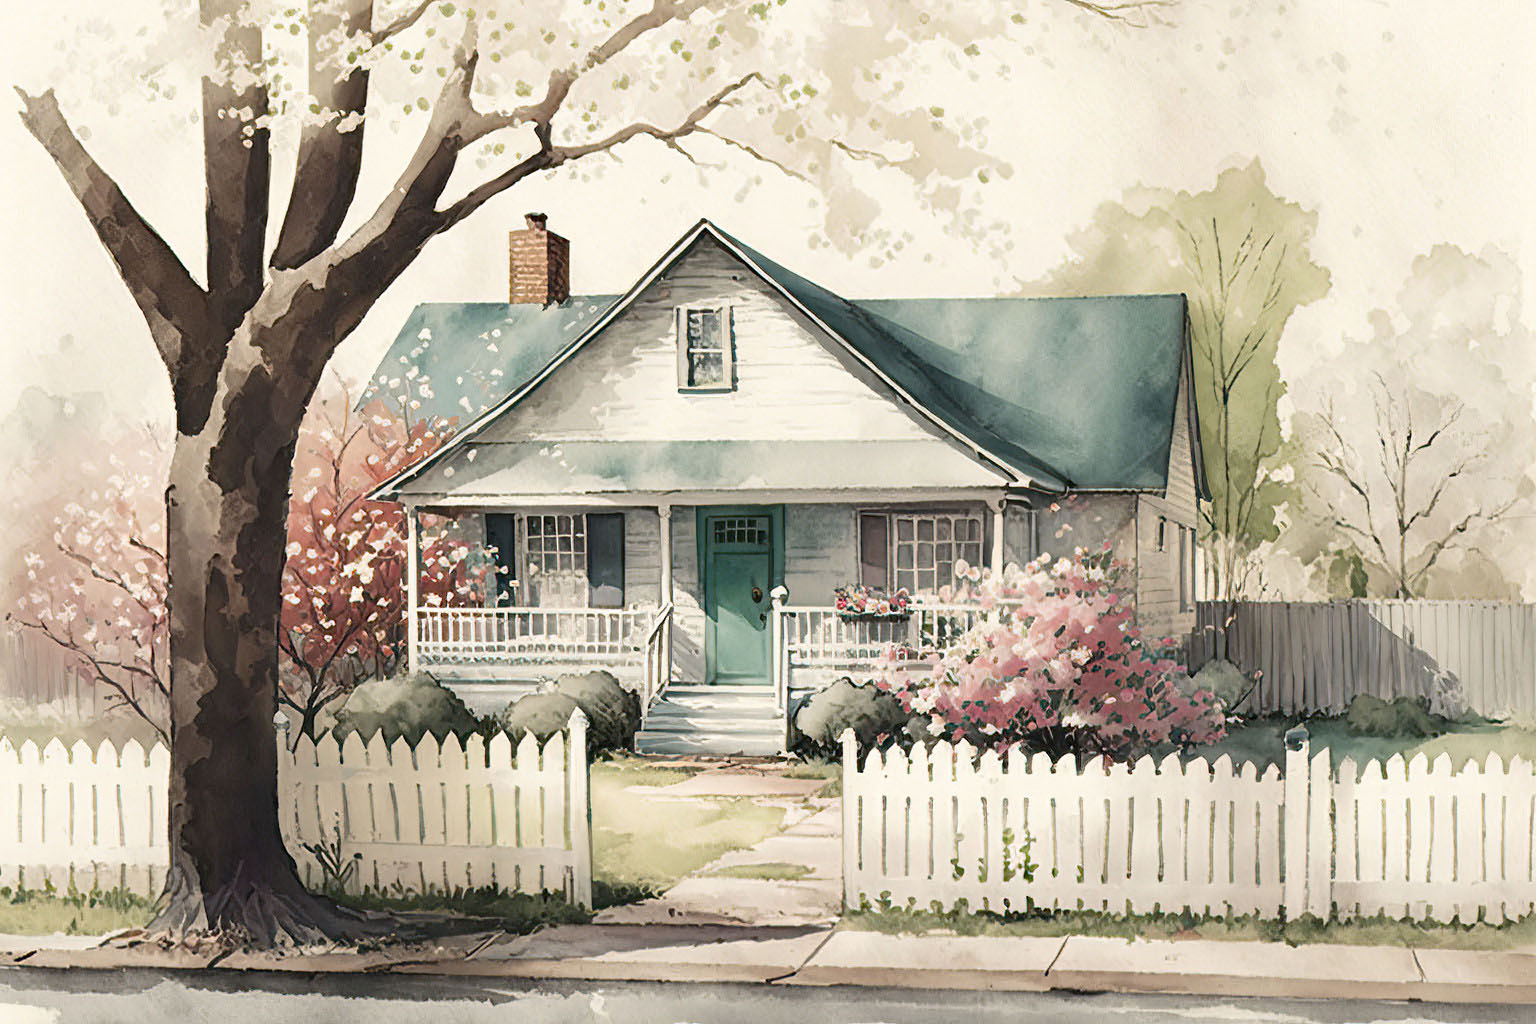 House with White picket fence